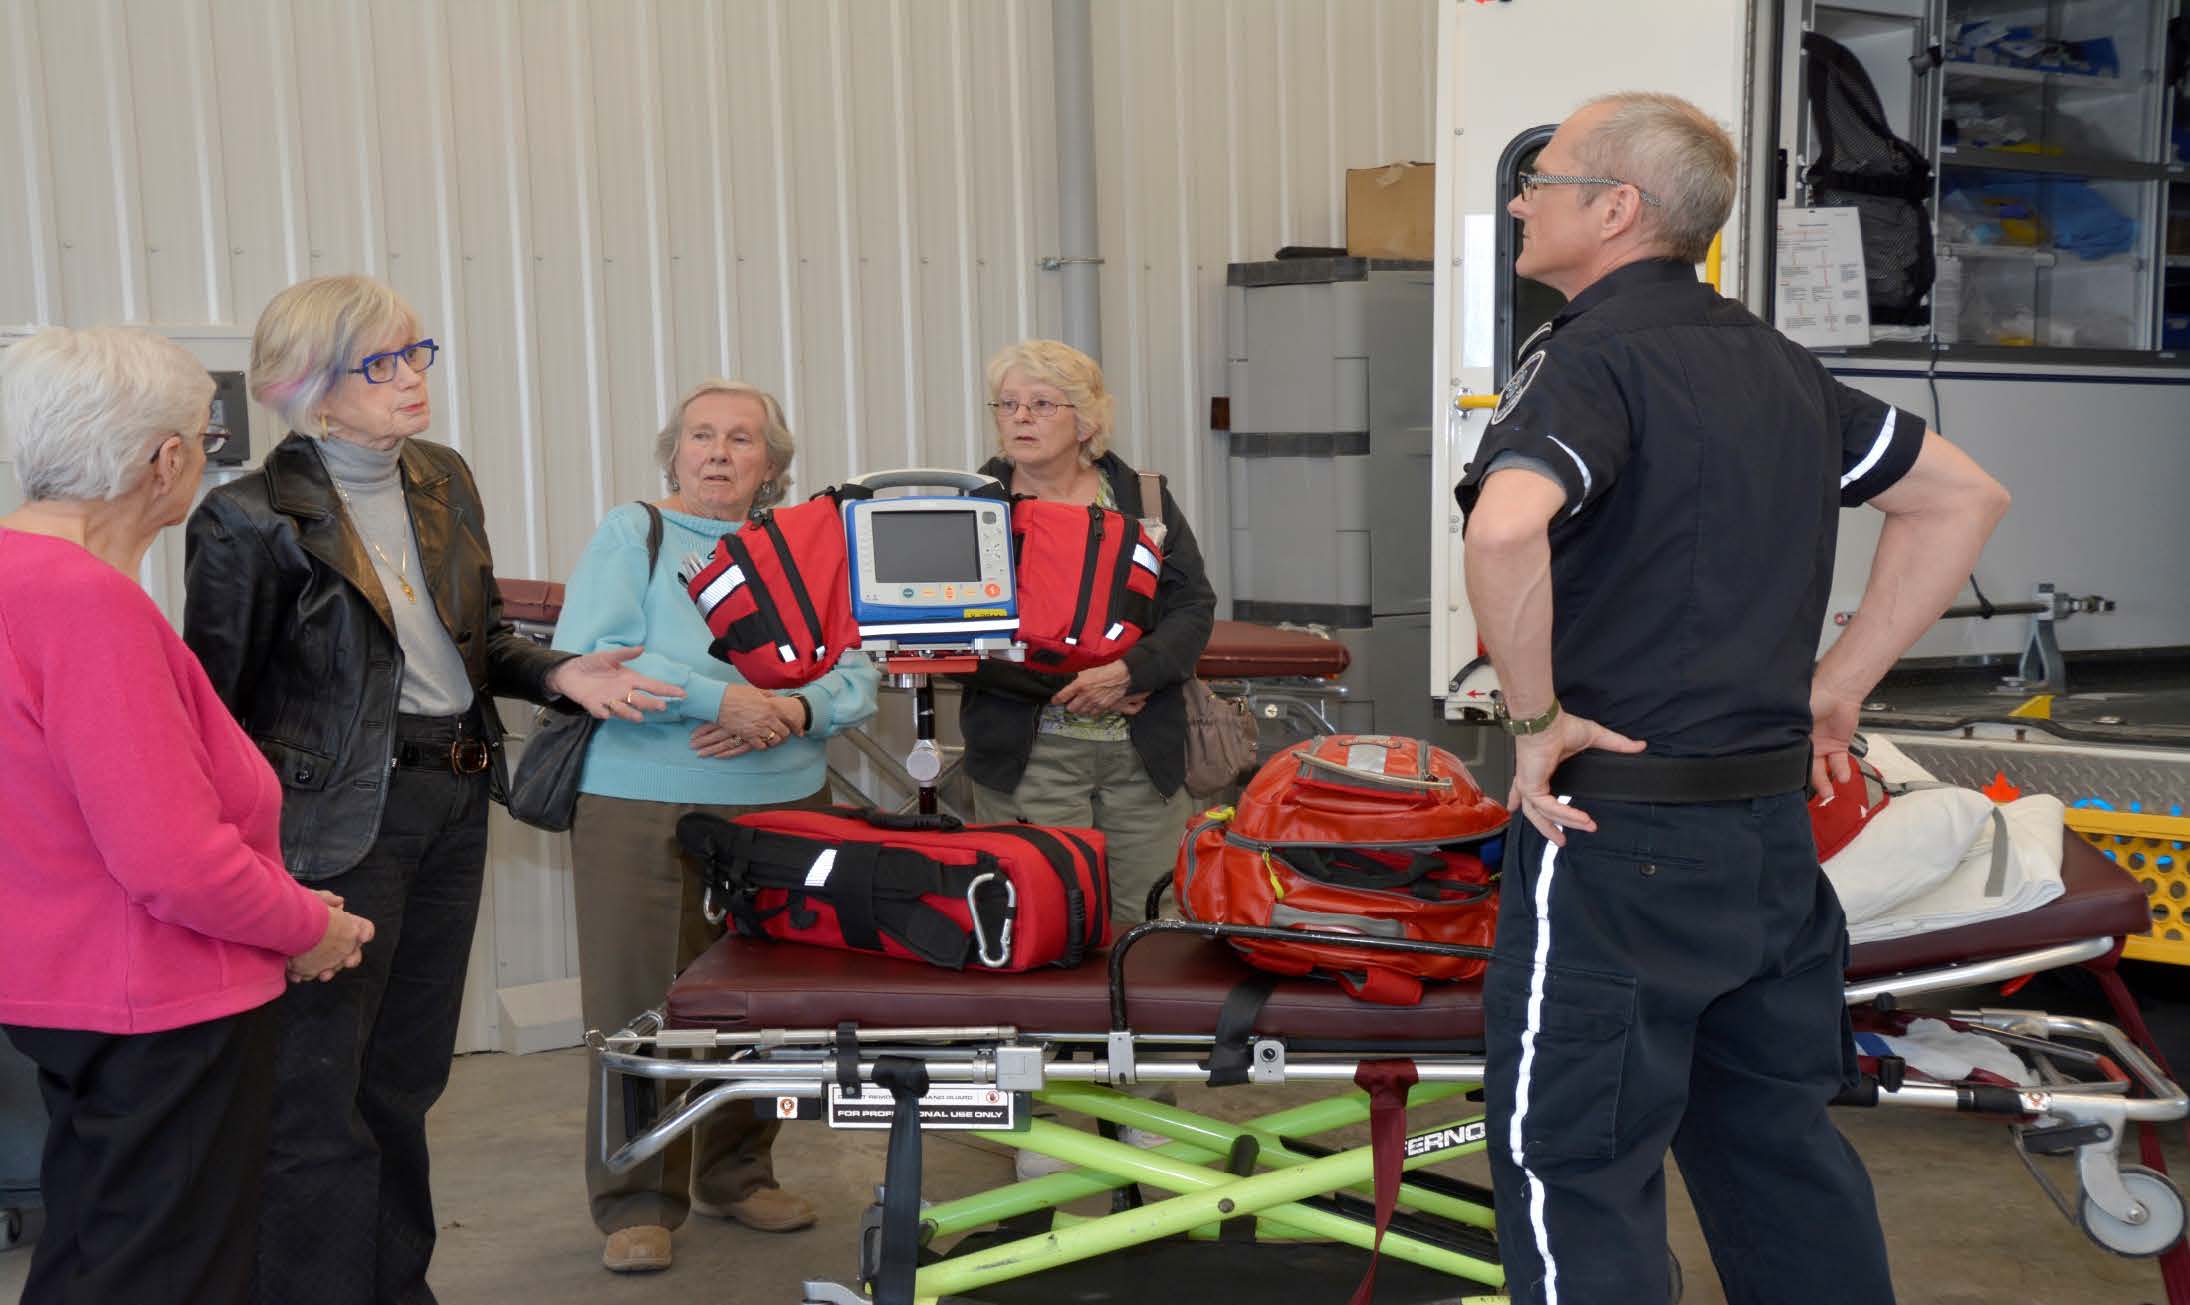 Older adults tour a fire hall in Prince Edward County as part of an RTOERO Foundation-funded grant to address social isolation in the area